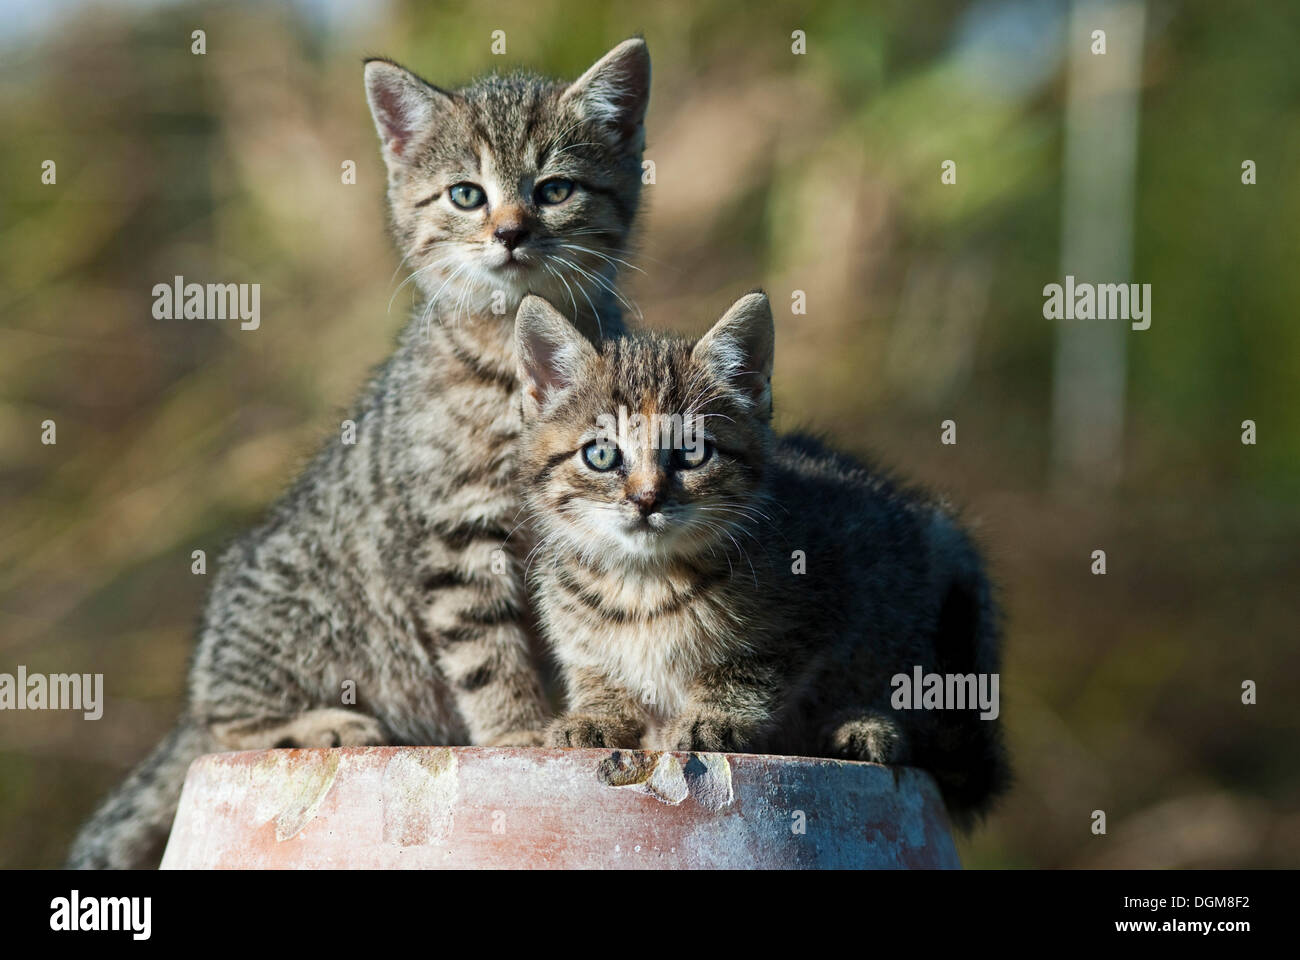 Domestic cat, two kittens sitting on a terracotta pot Stock Photo